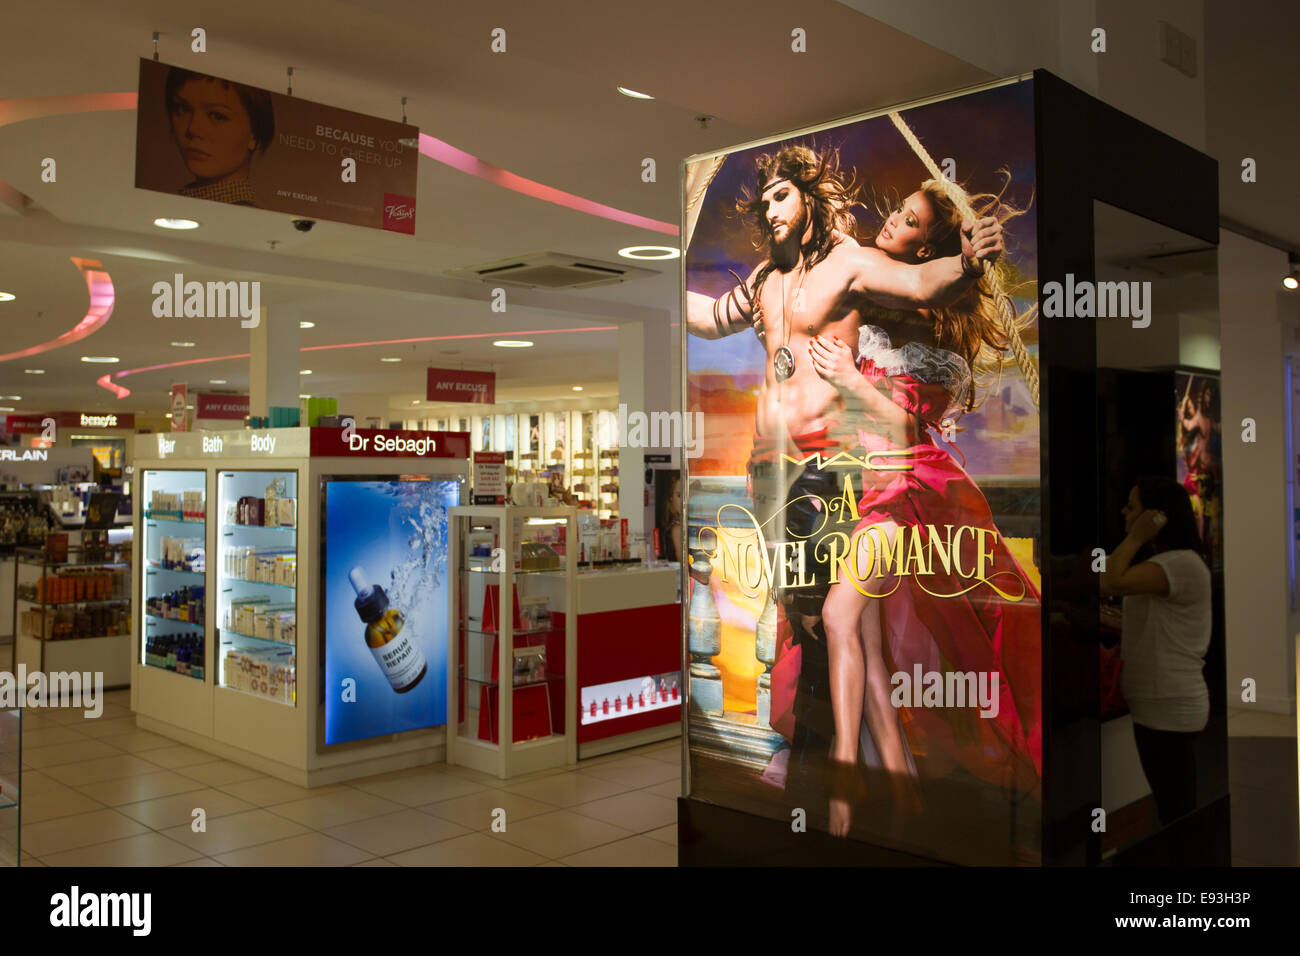 a novel romance by Mac display and advertisement in store St Helier Jersey The Channel Islands Stock Photo